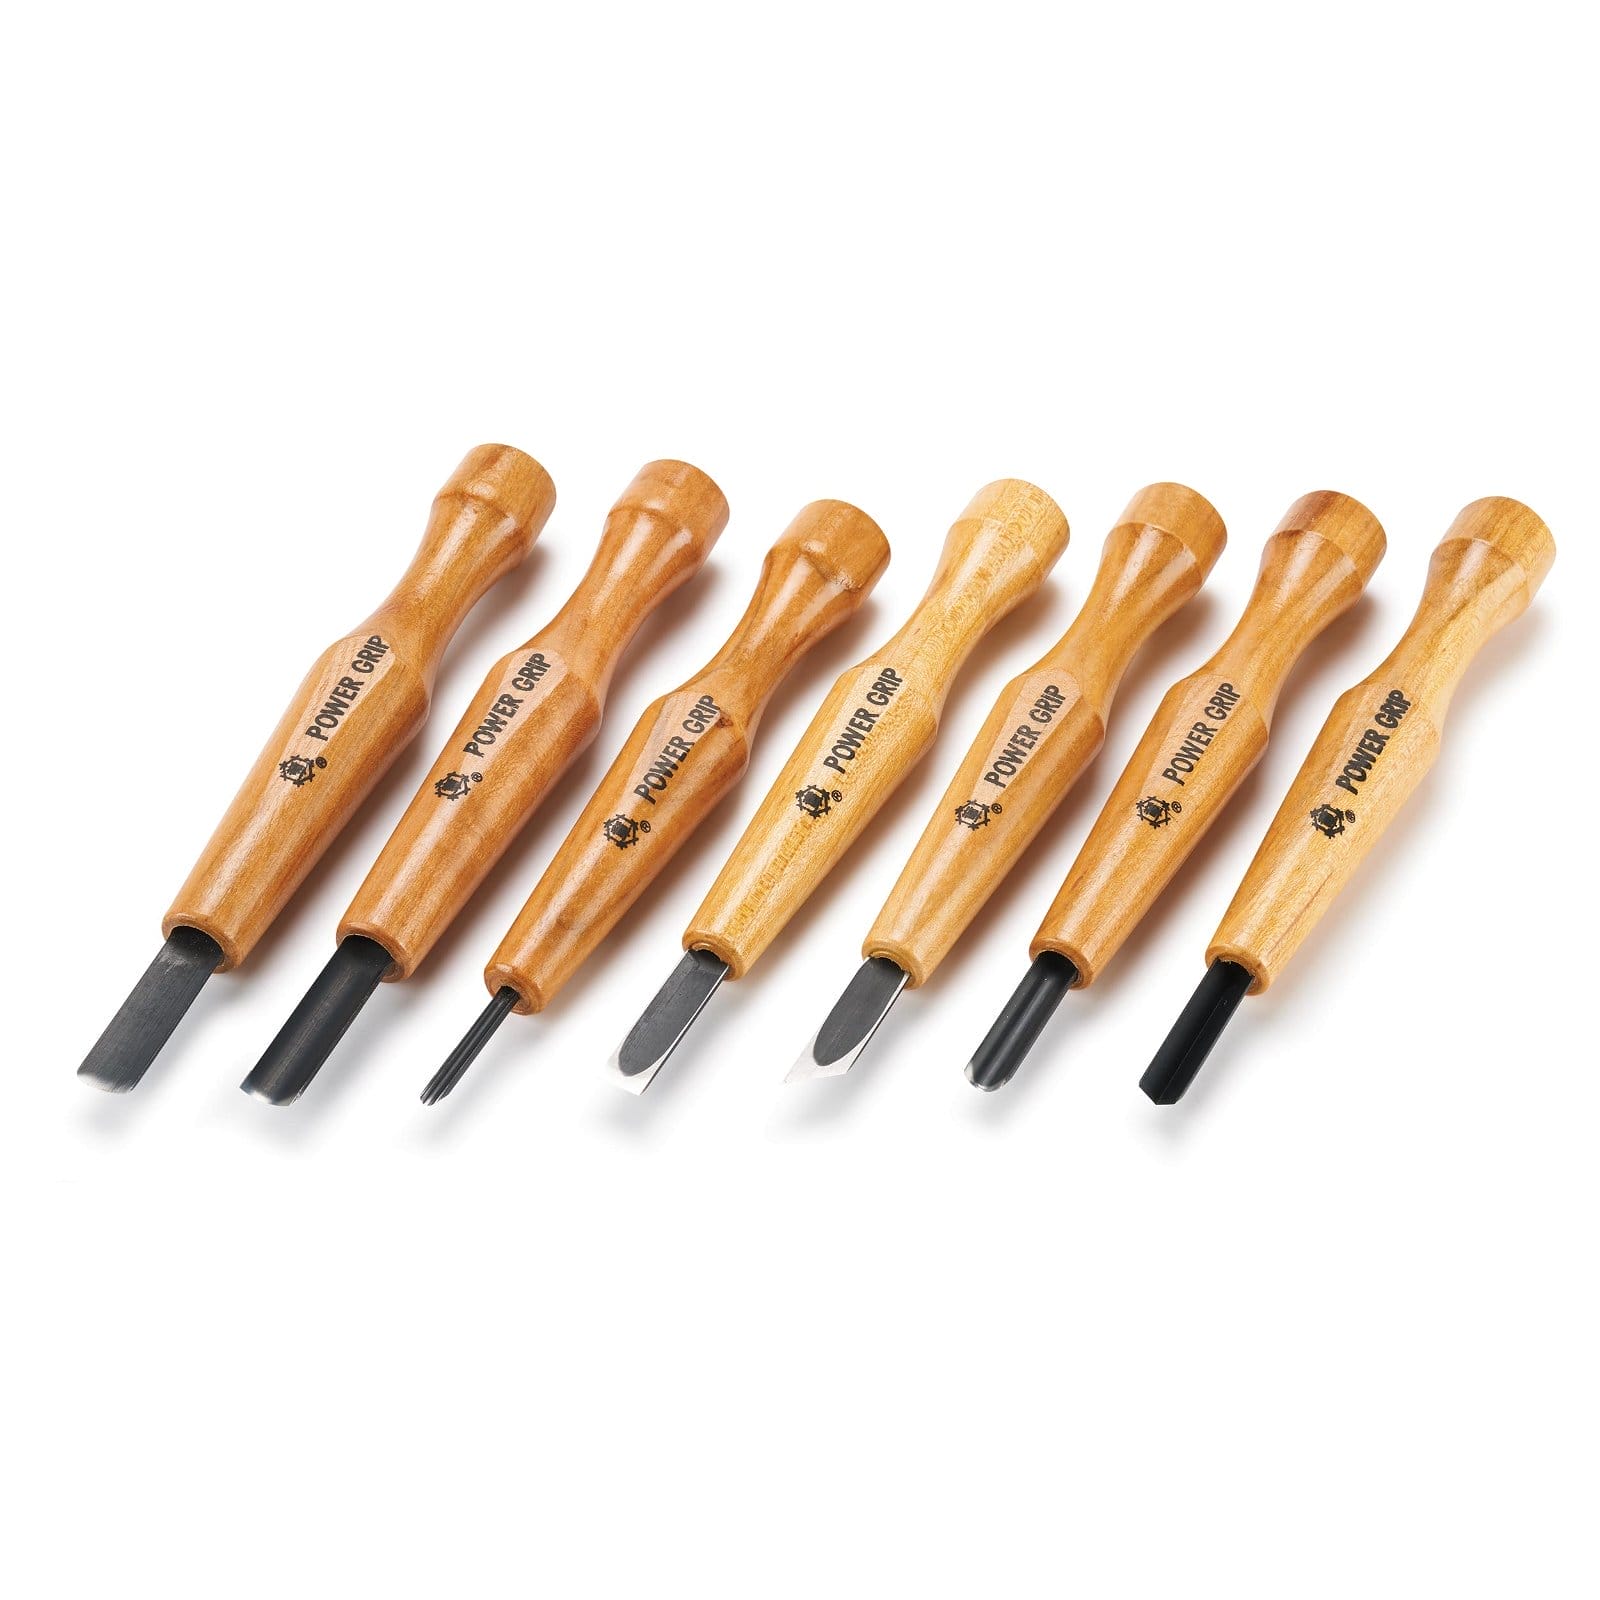 \\$30 OFF - Shinwa® Full Size Power Grip Carving Tool Set 7pc. Sized between palm and big tools.